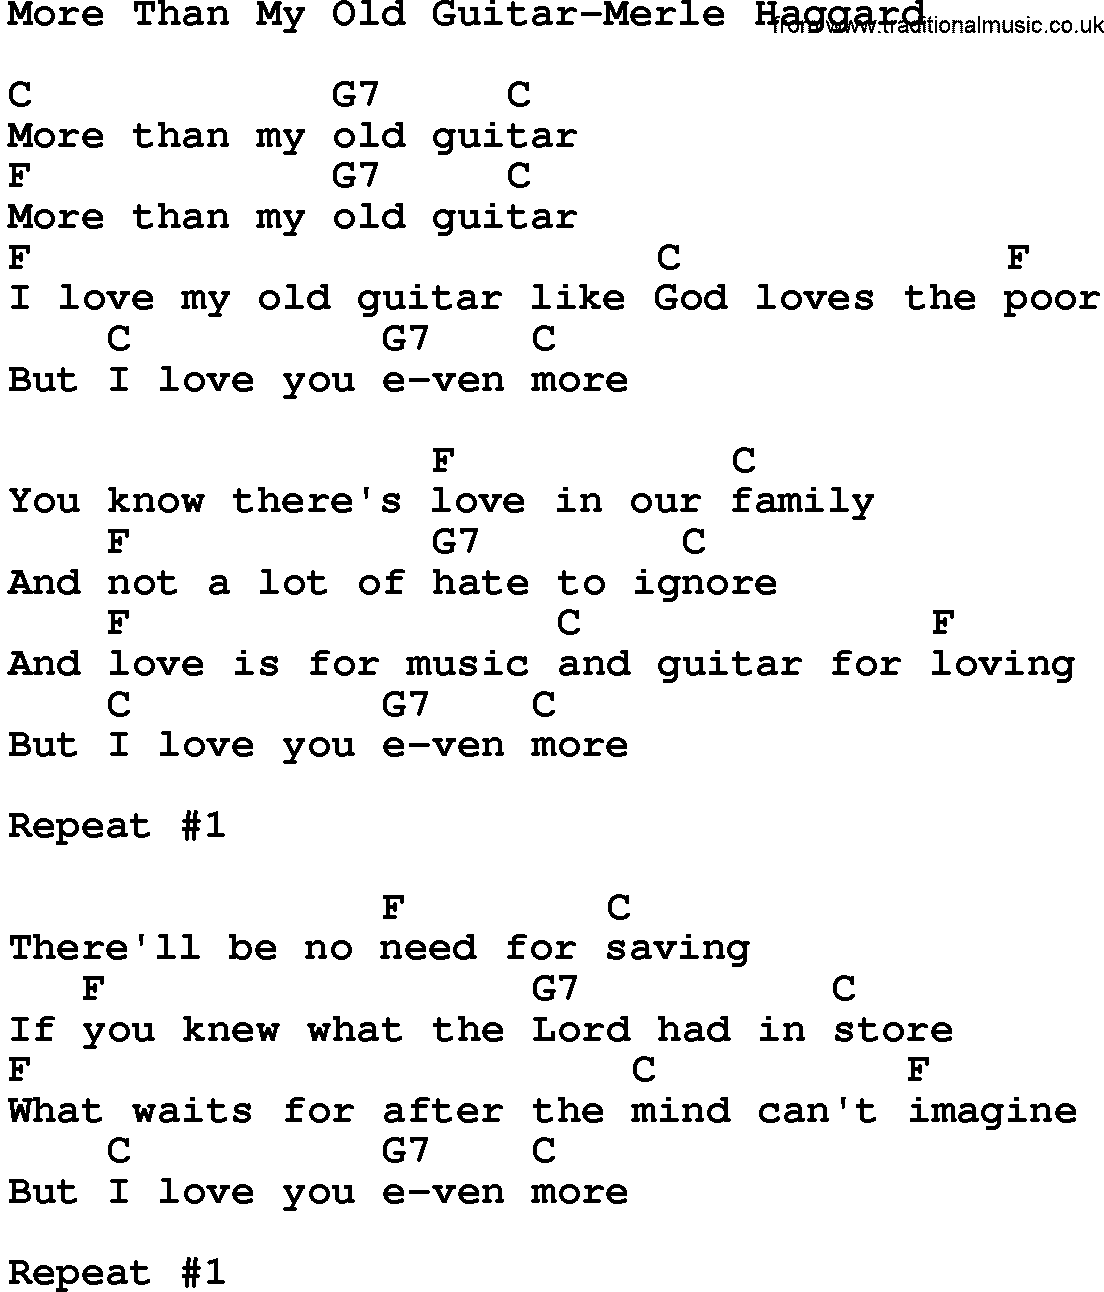 Country music song: More Than My Old Guitar-Merle Haggard lyrics and chords